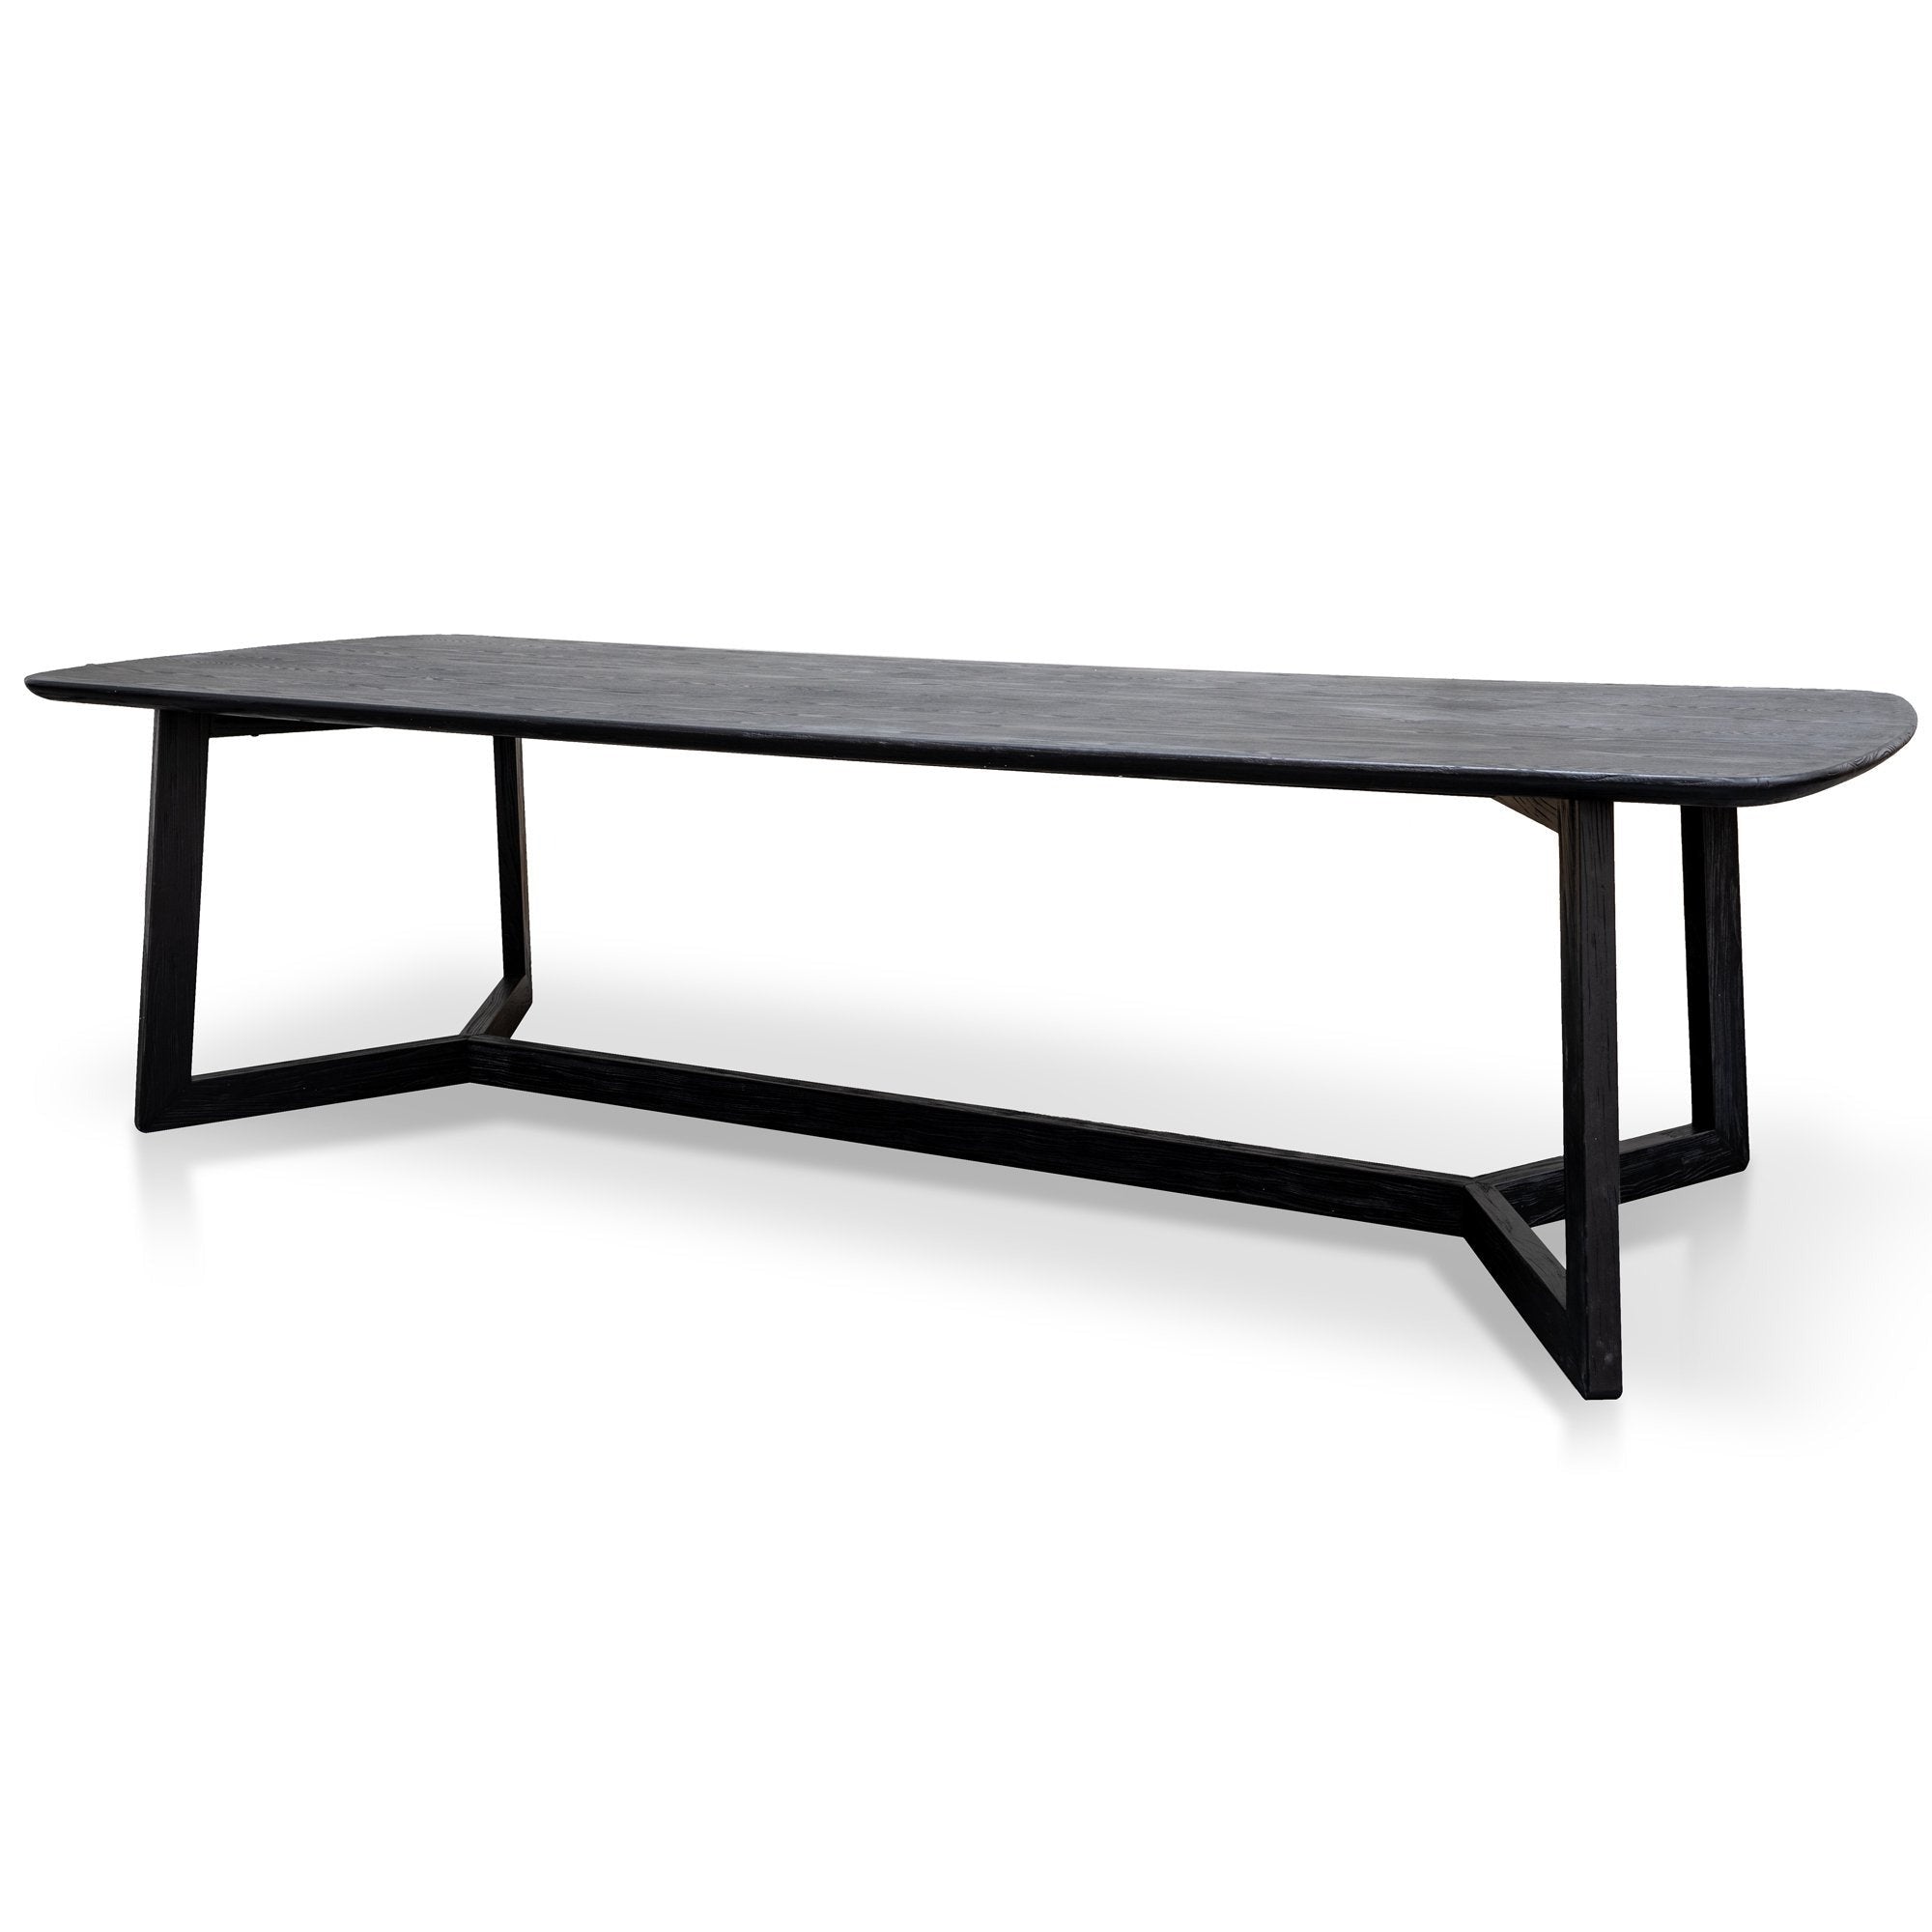 Ashley 2.4m Wooden Dining Table - Black - Dining Tables